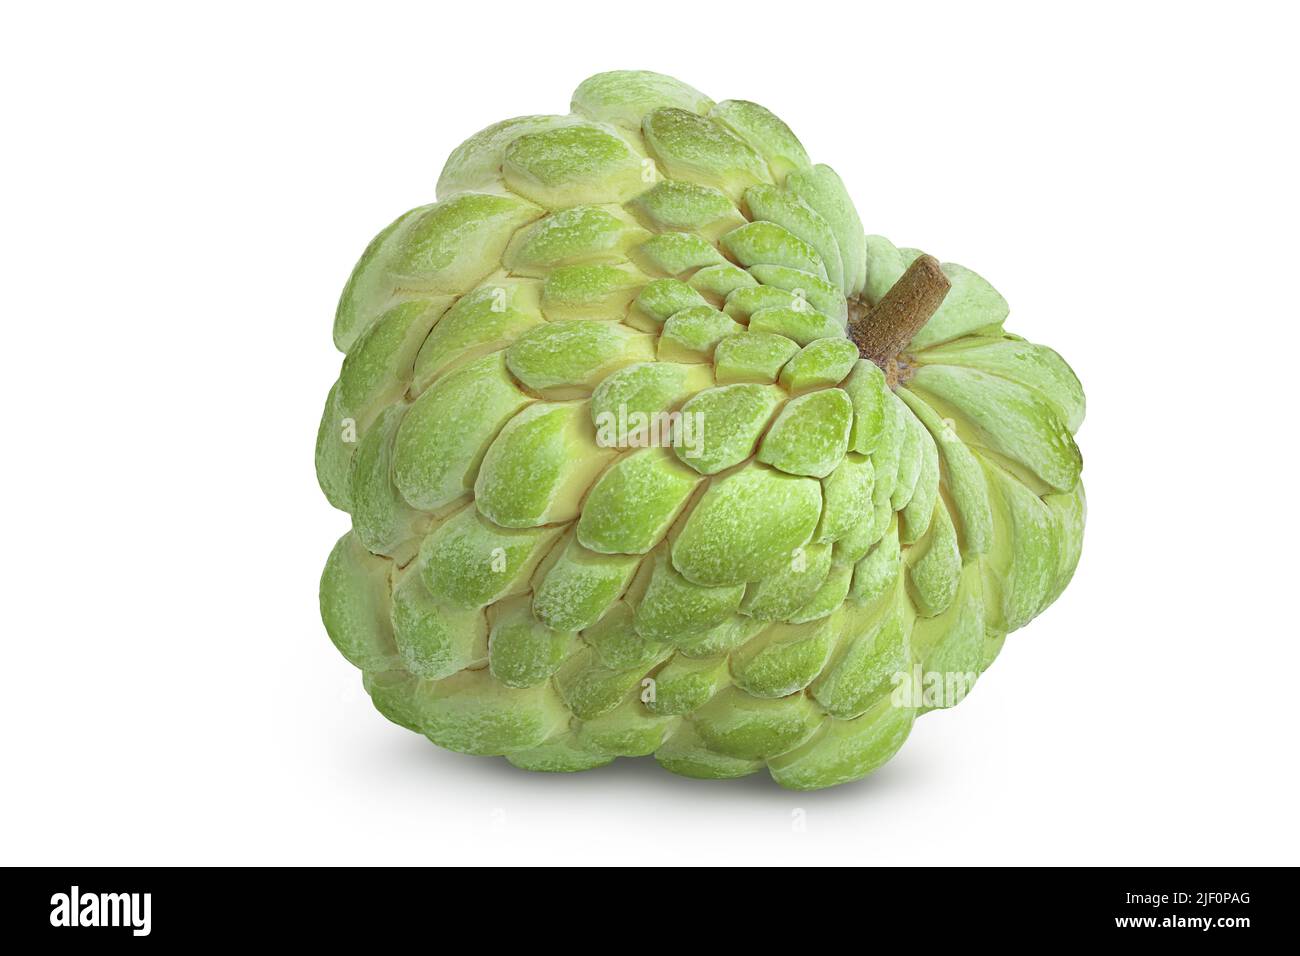 Sugar apple or custard apple isolated on white background with full depth of field. Exotic tropical Thai annona or cherimoya fruit Stock Photo